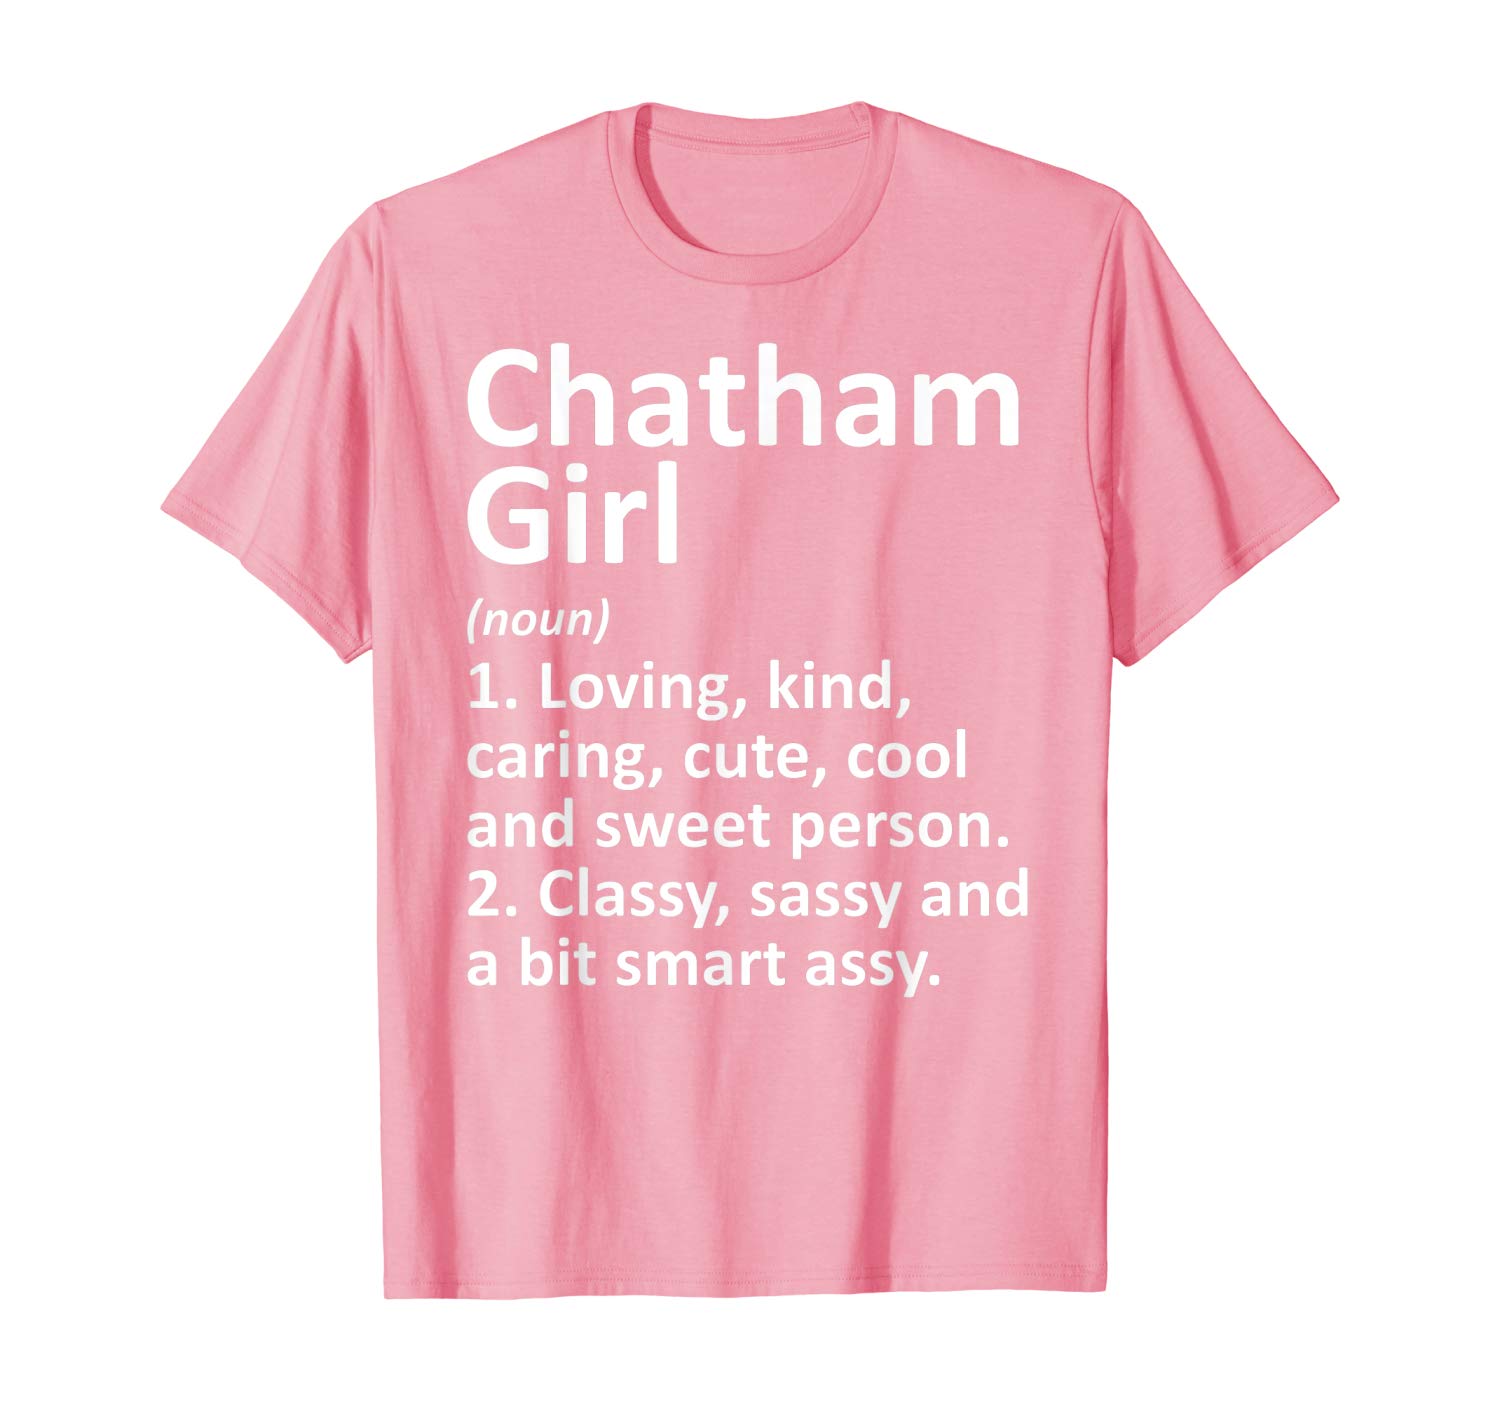 Awesome CHATHAM GIRL IL ILLINOIS Funny City Home Roots Gift T-Shirt T-Shirt Sweatshirt Hoodie